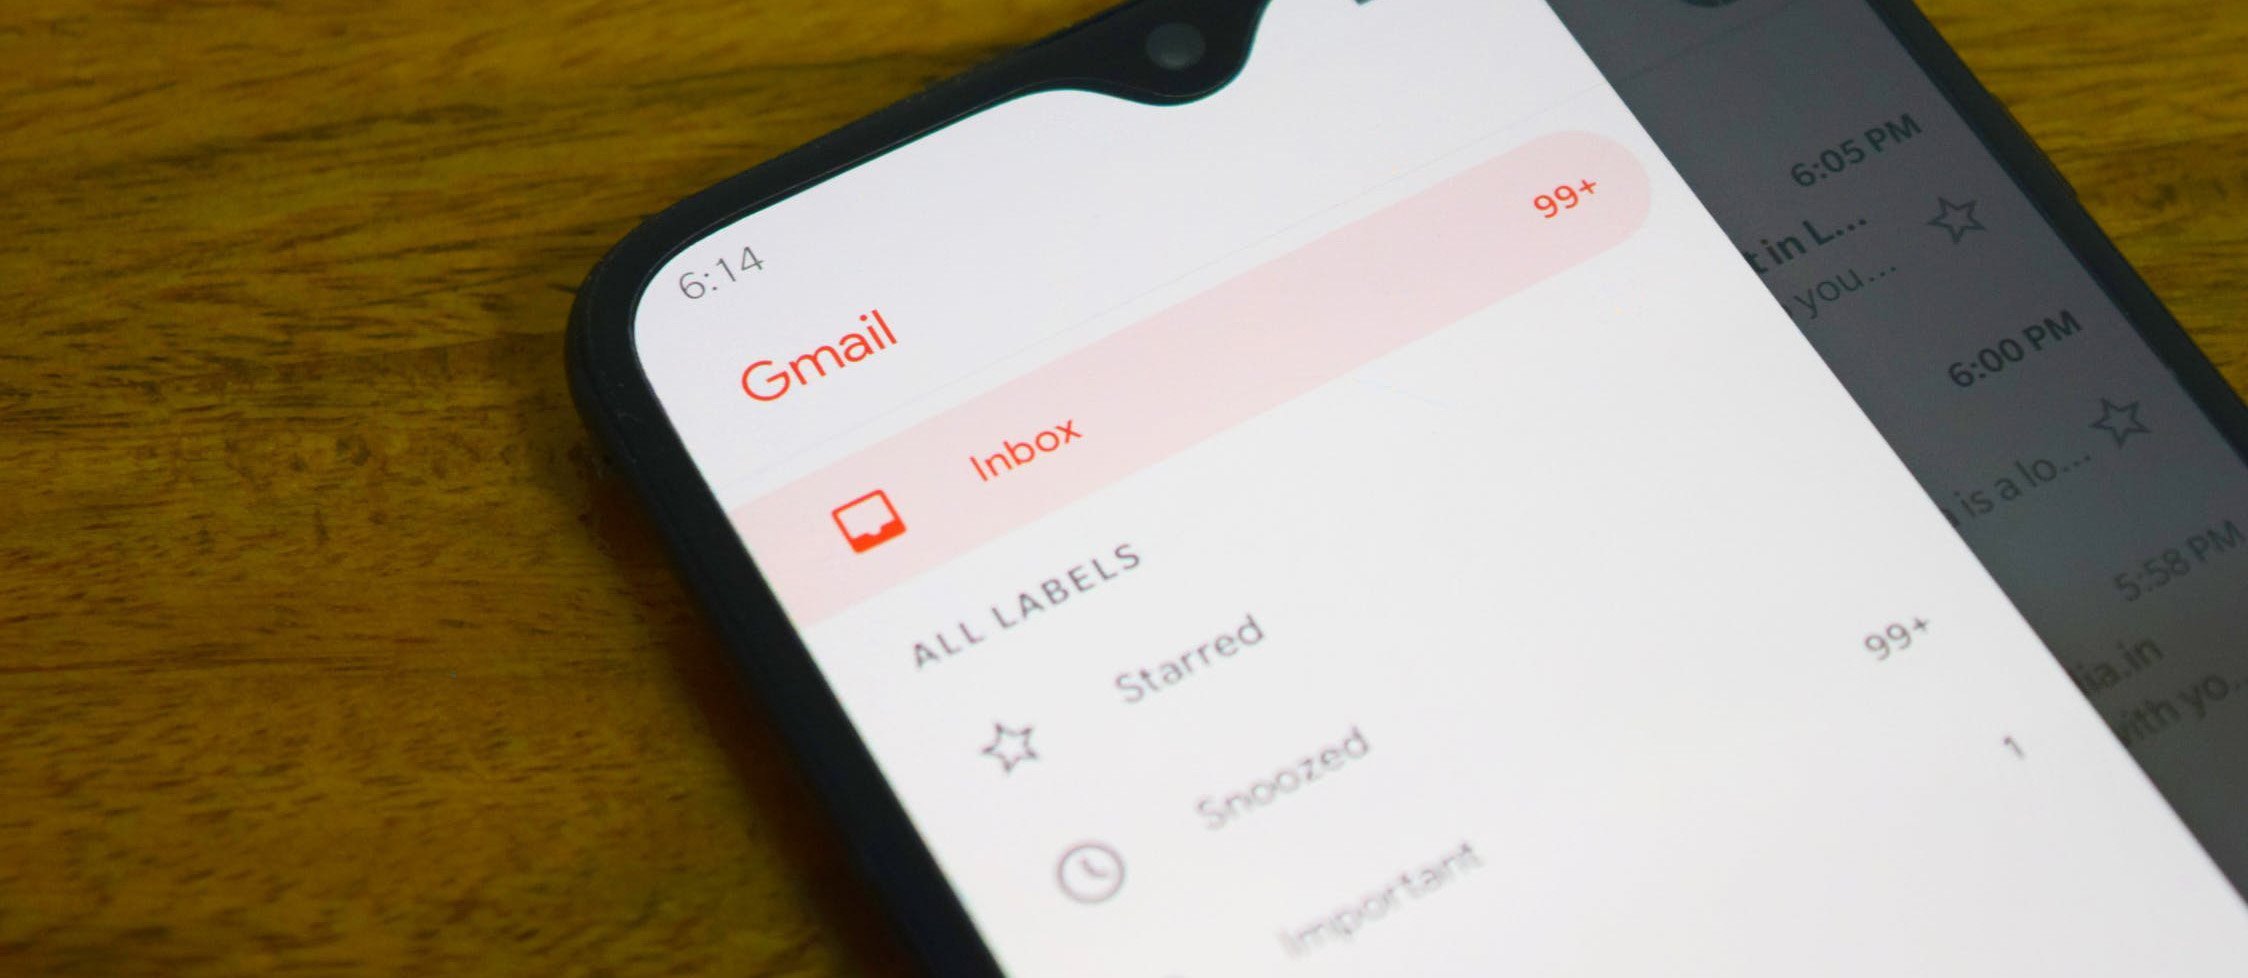 image of phone with gmail app